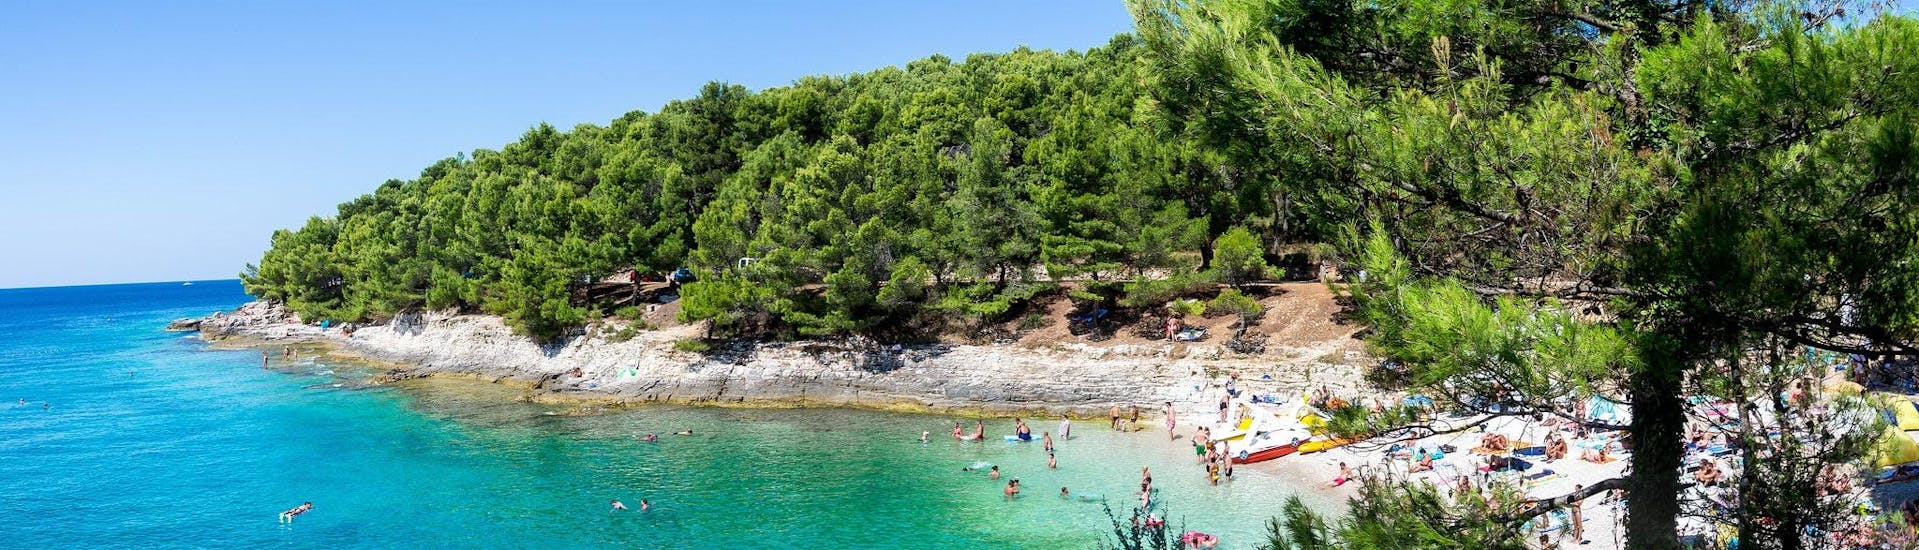 View of the beach at Cape Kamenjak, a popular destination for sea kayaking in Pula.